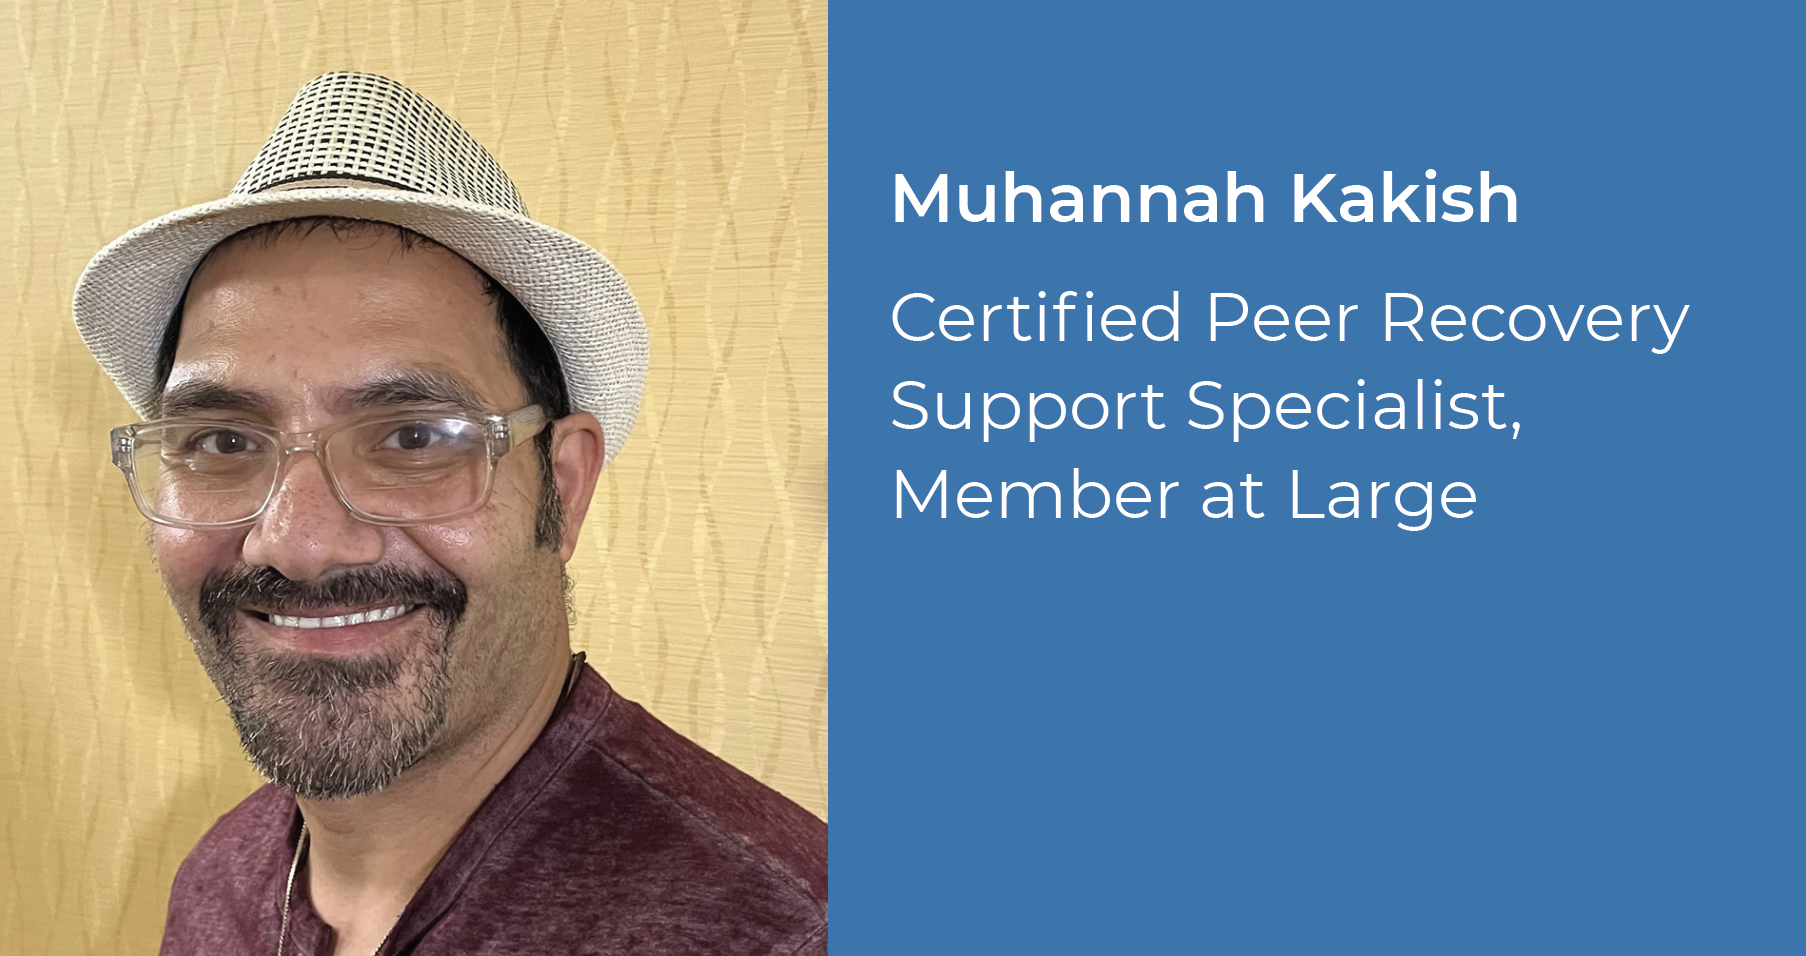 Muhannah Kakish Certified Peer Recovery Support Specialist, Member at Large